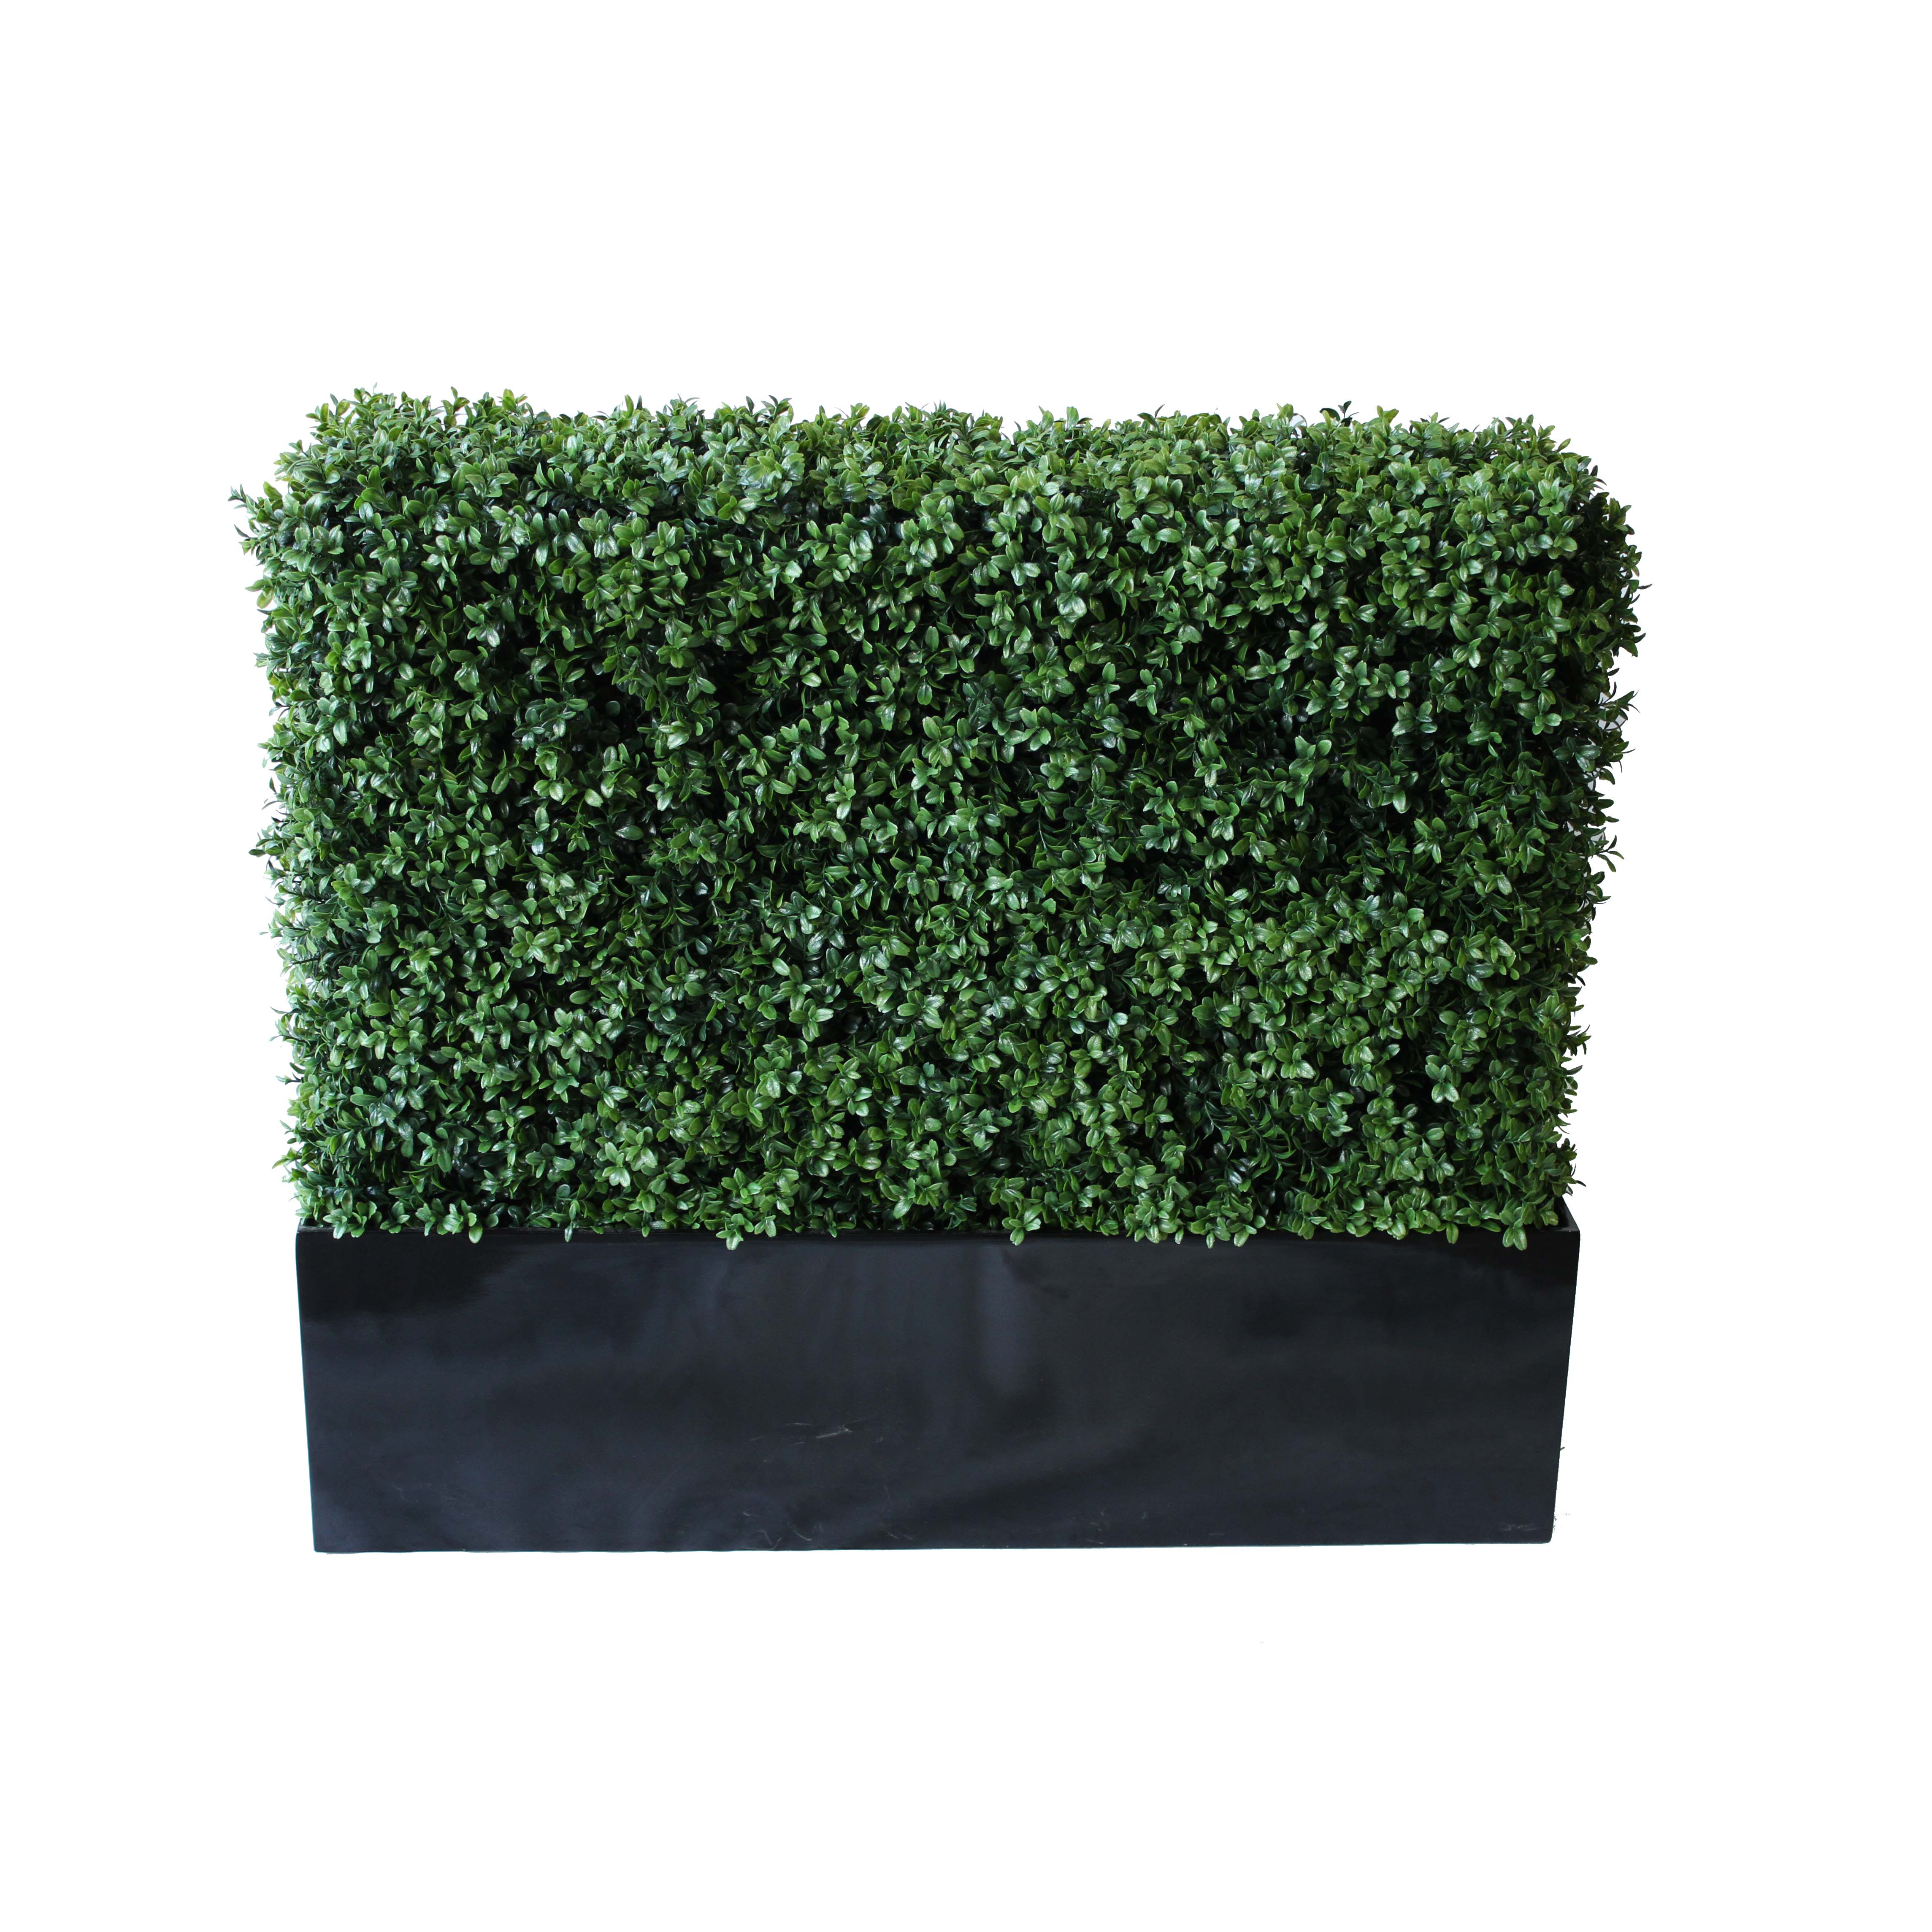 PREMIUM DELUXE BOXWOOD HEDGE 90 WIDE X 75CM TALL WITH FIBREGLASS TROUGH